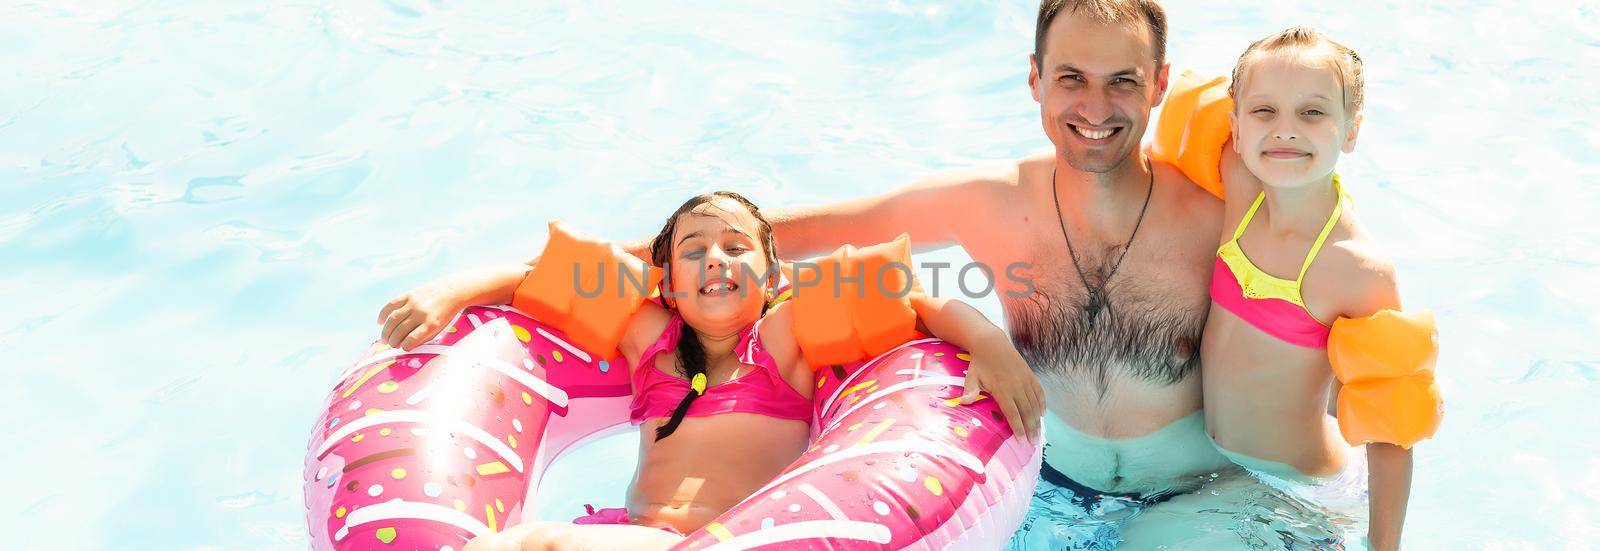 Children playing in pool. Two little girls having fun in the pool. Summer holidays and vacation concept by Andelov13